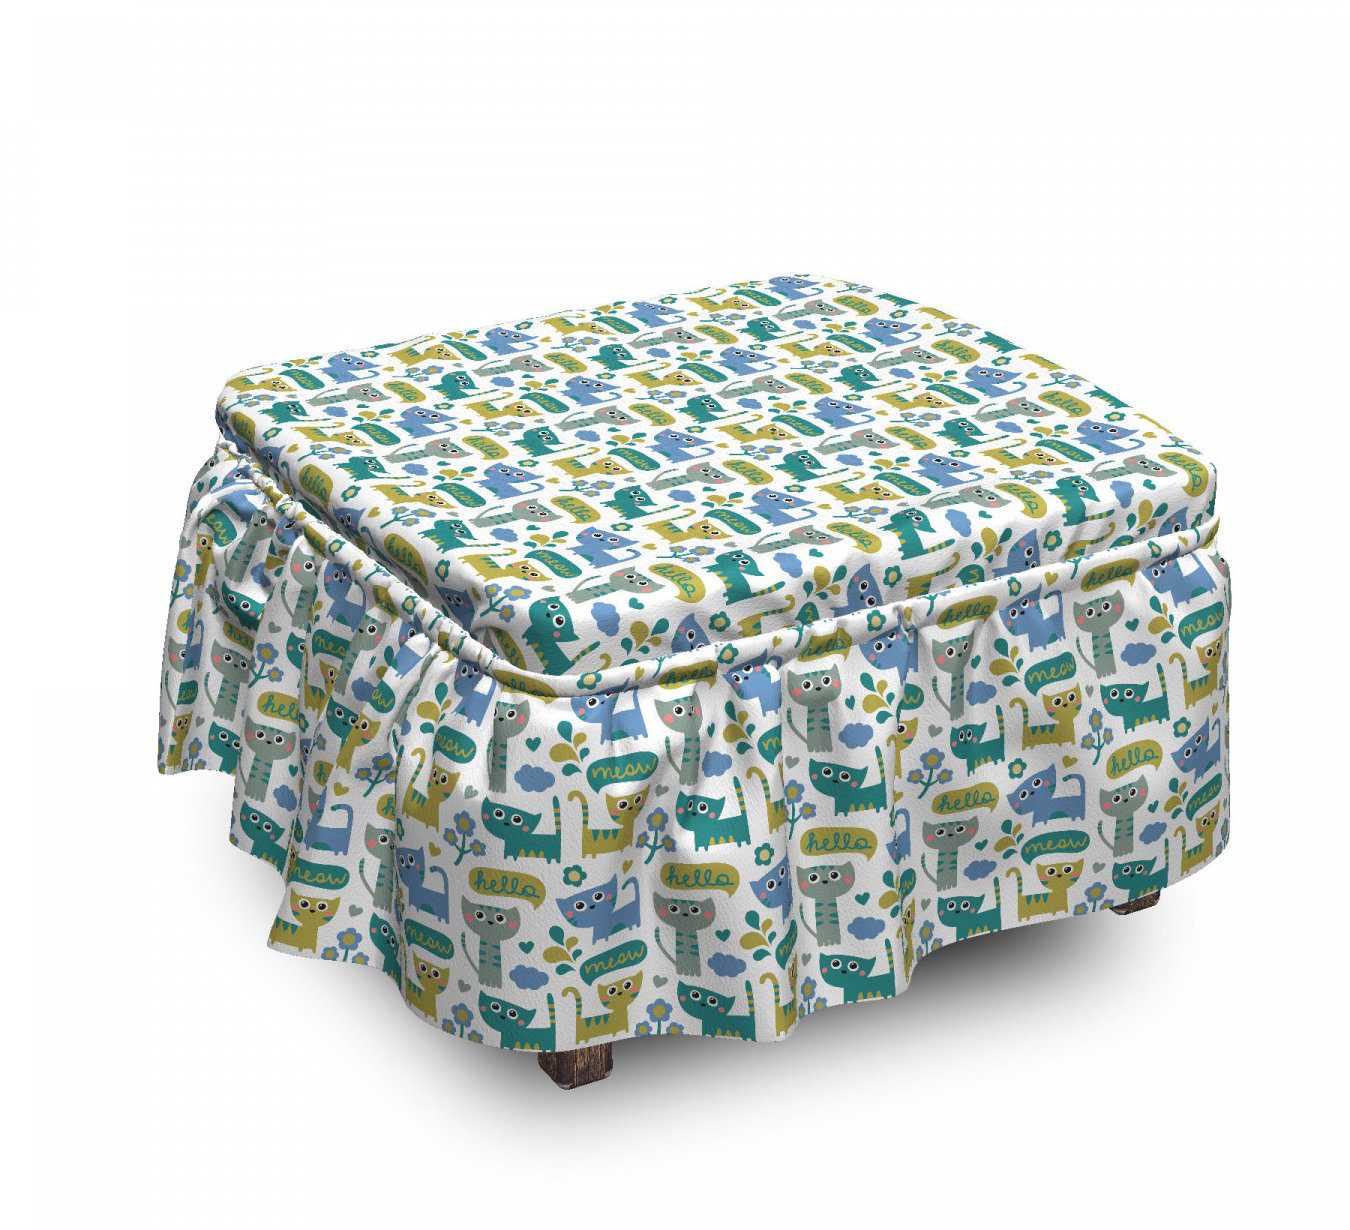 Bless international Kittens Saying Hello and Meow Ottoman Slipcover